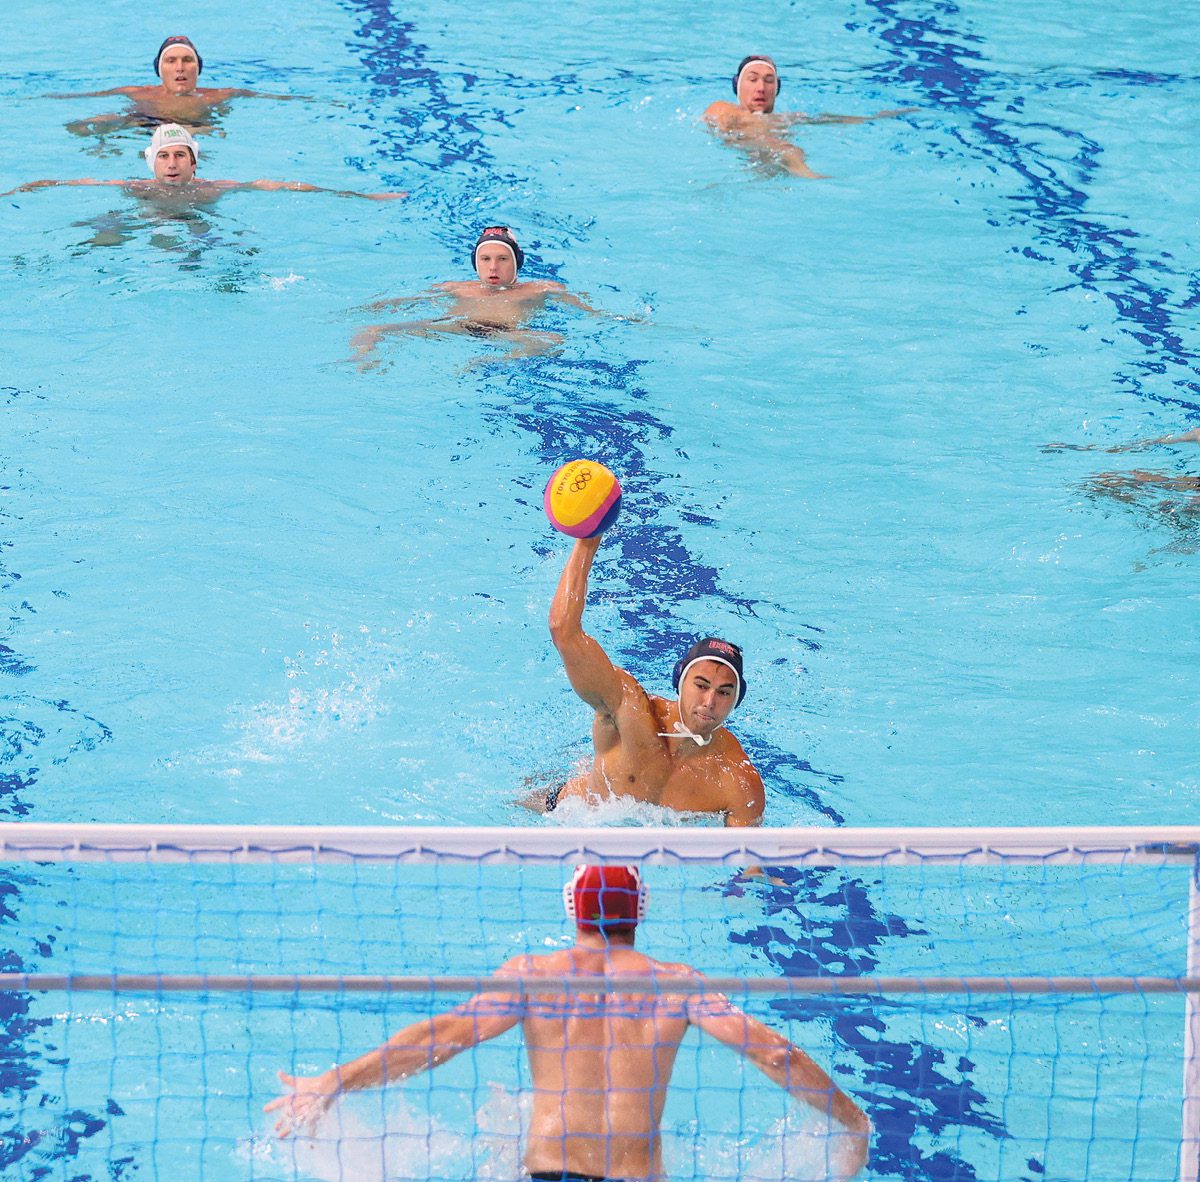 Johnny Hooper, BS 19, shooting a ball during a water polo match in the Olympics